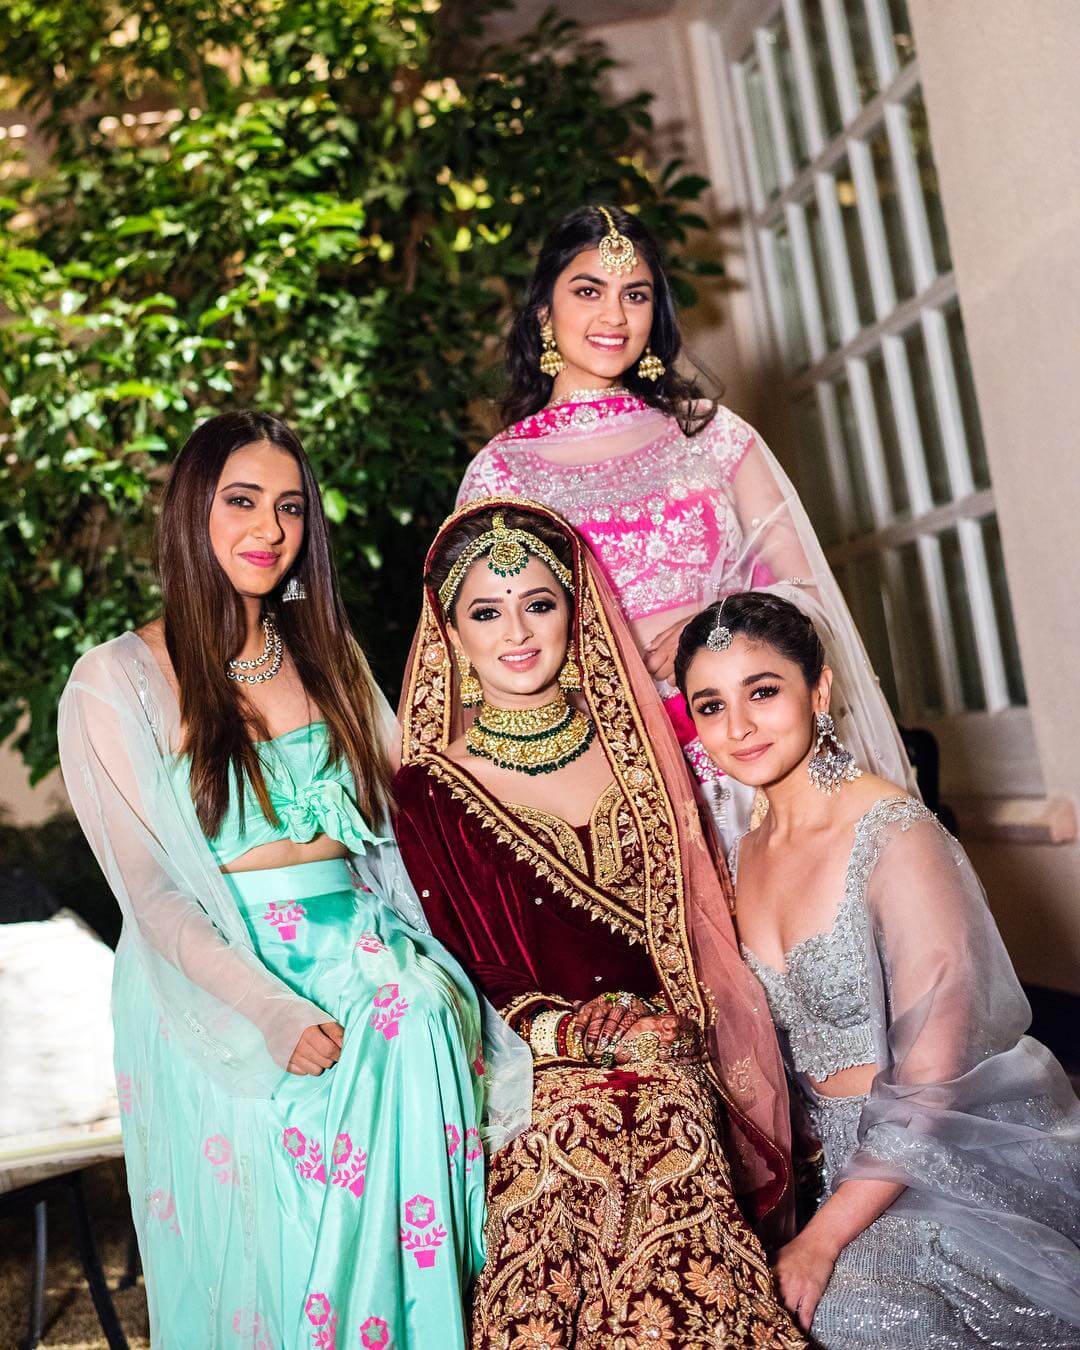 Photoshoot Poses For The Bride With Their BFFs